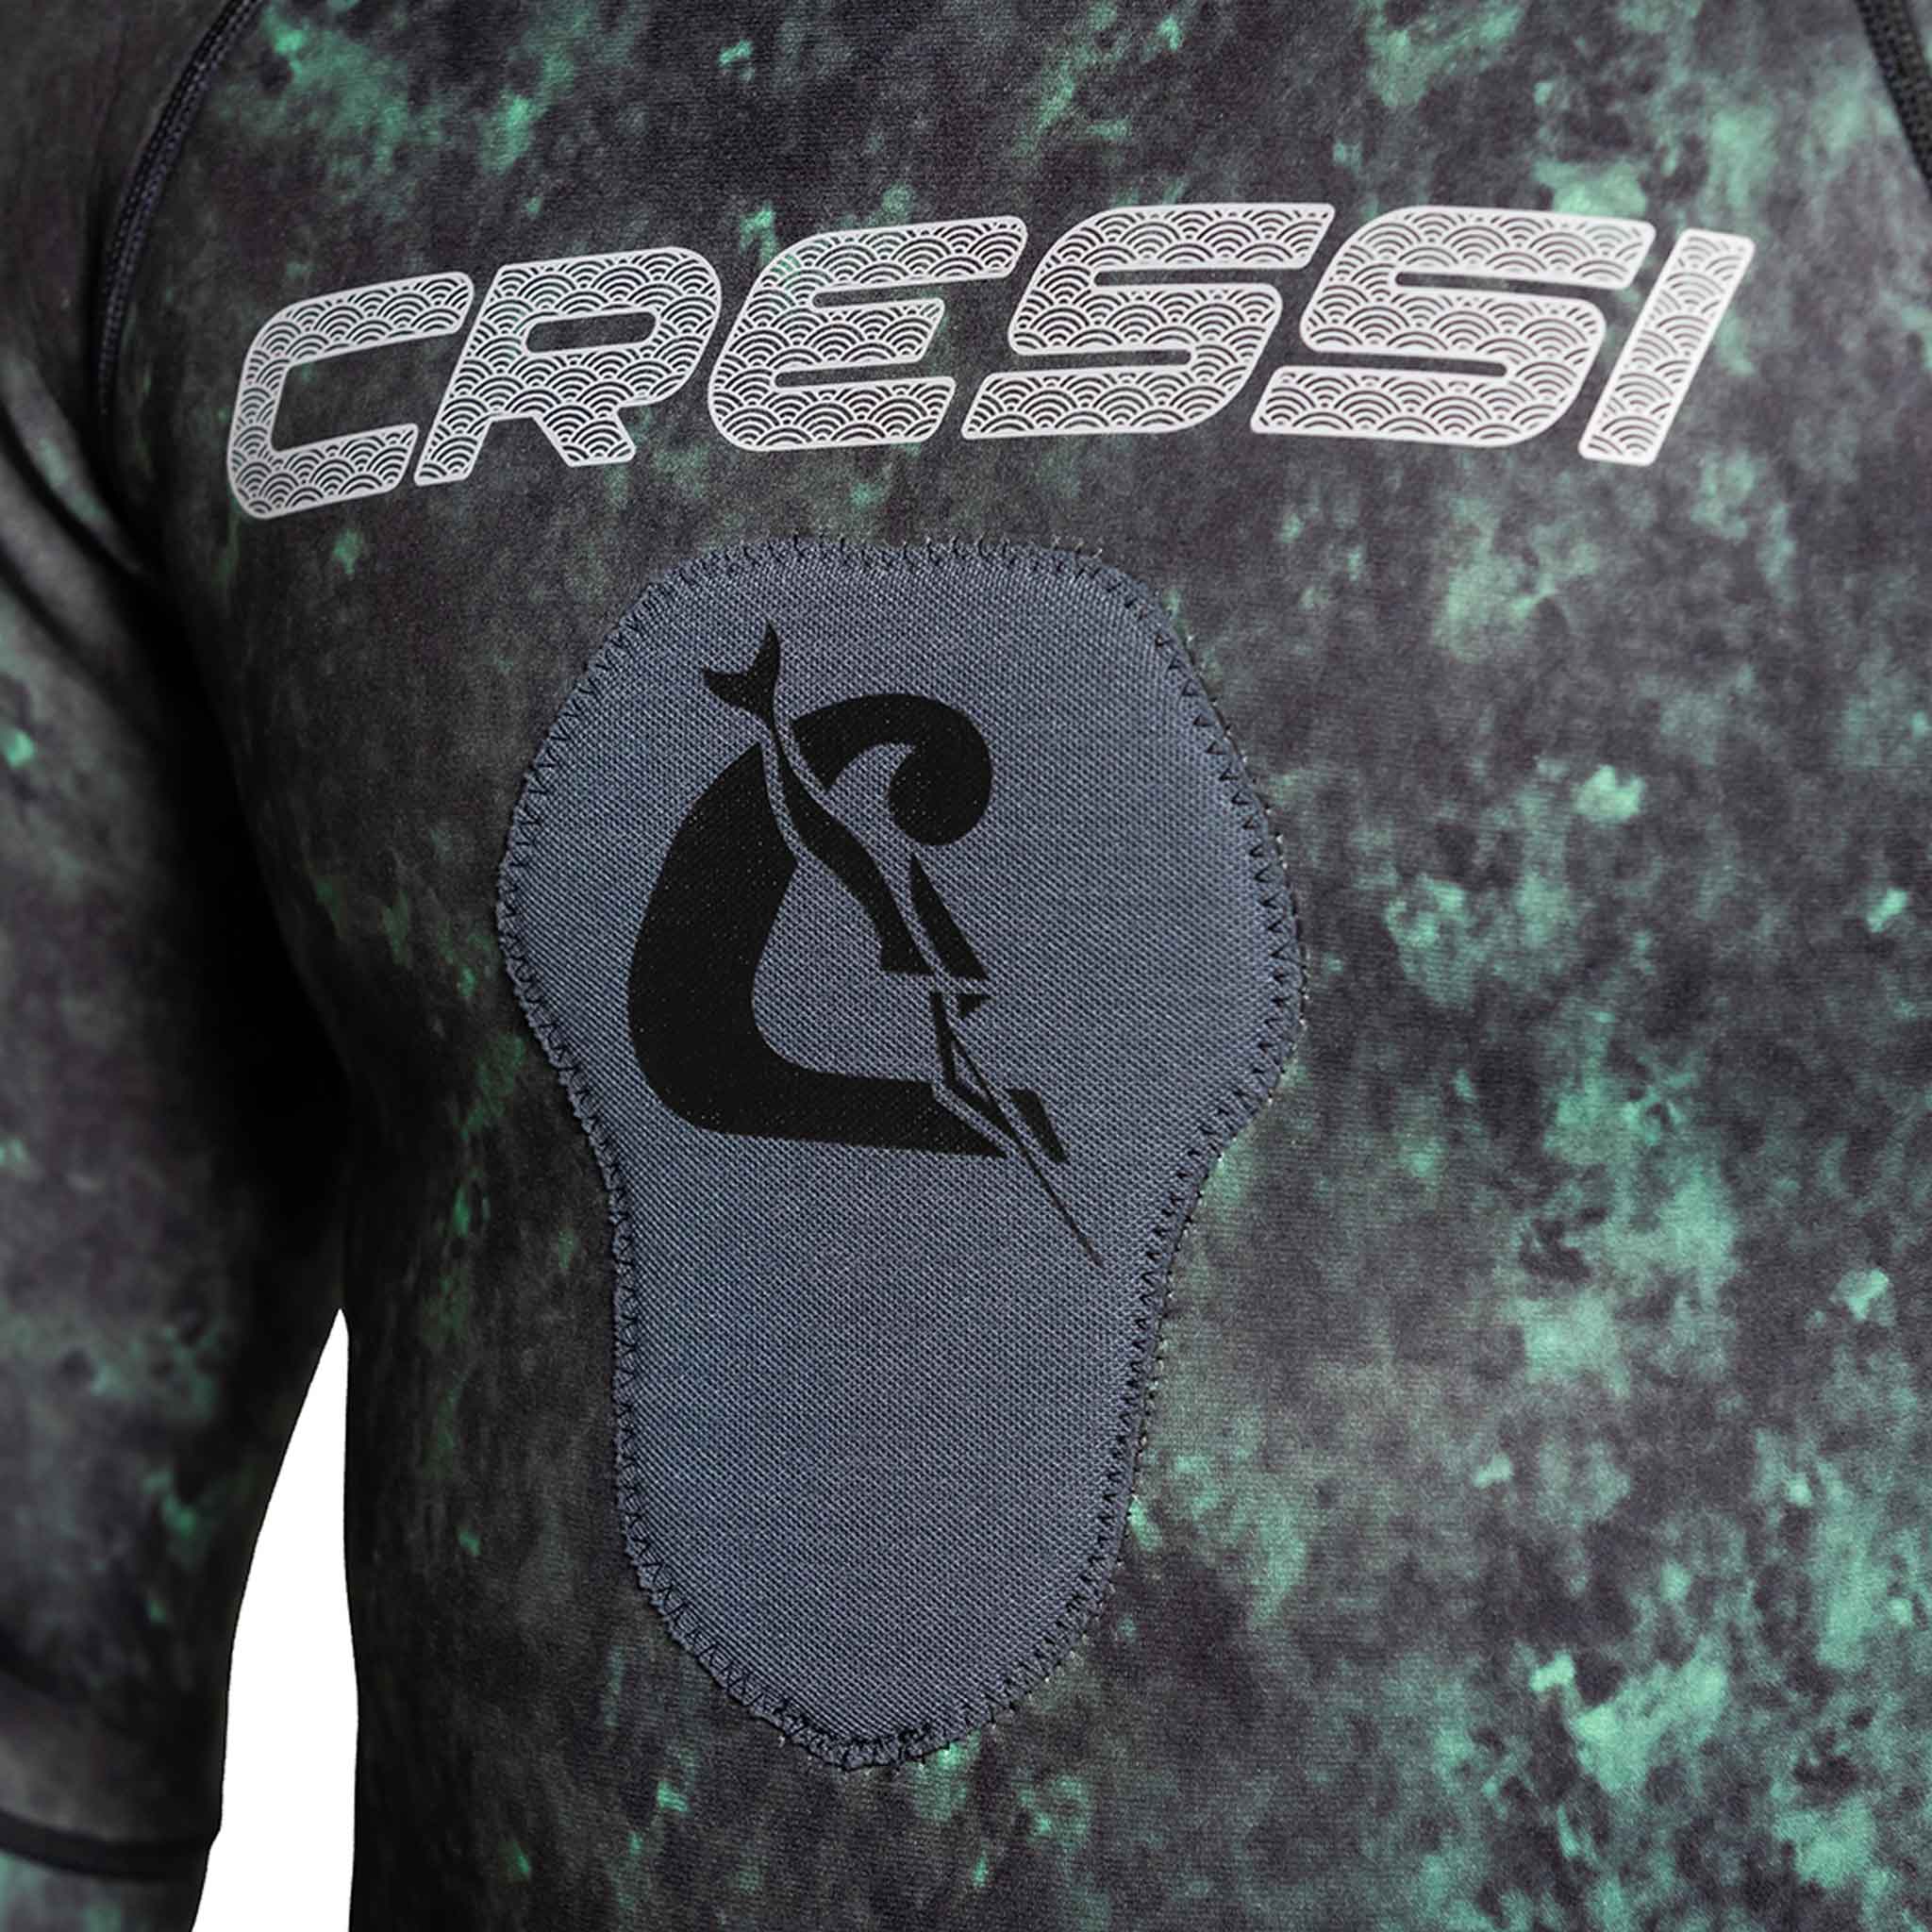 Cressi Scorfano 3.5mm Open Cell Wetsuit Mens ($499)